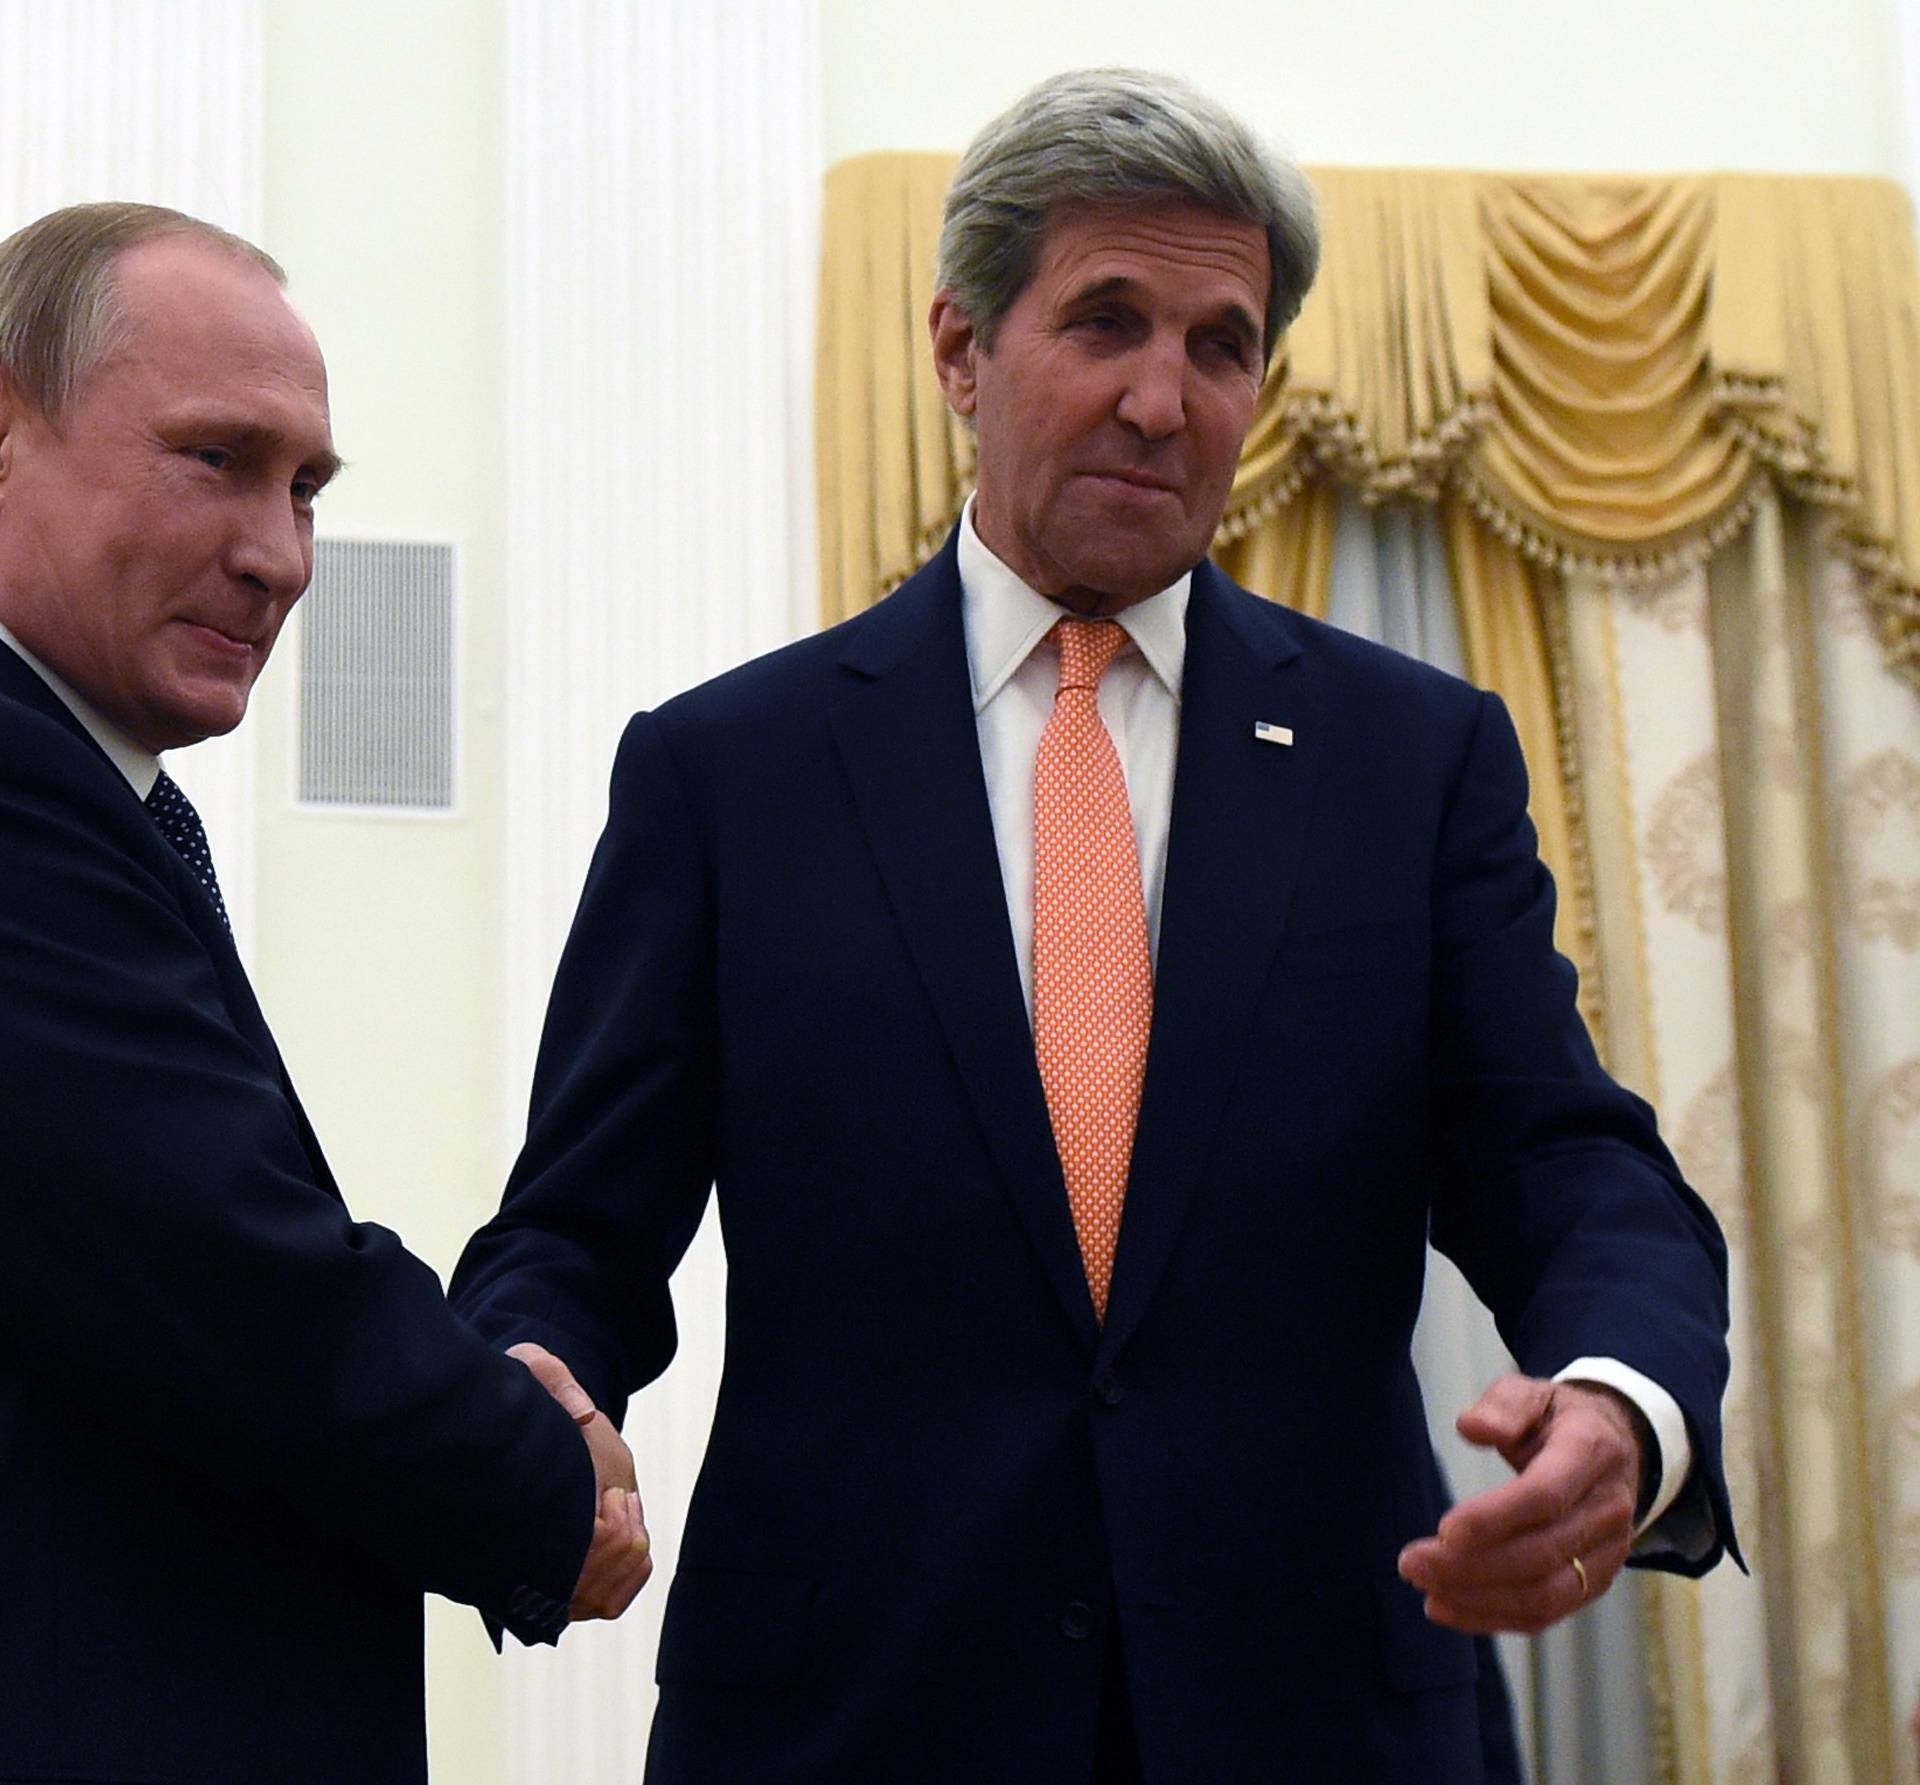 Russian President Putin meets with U.S. Secretary of State Kerry in Moscow